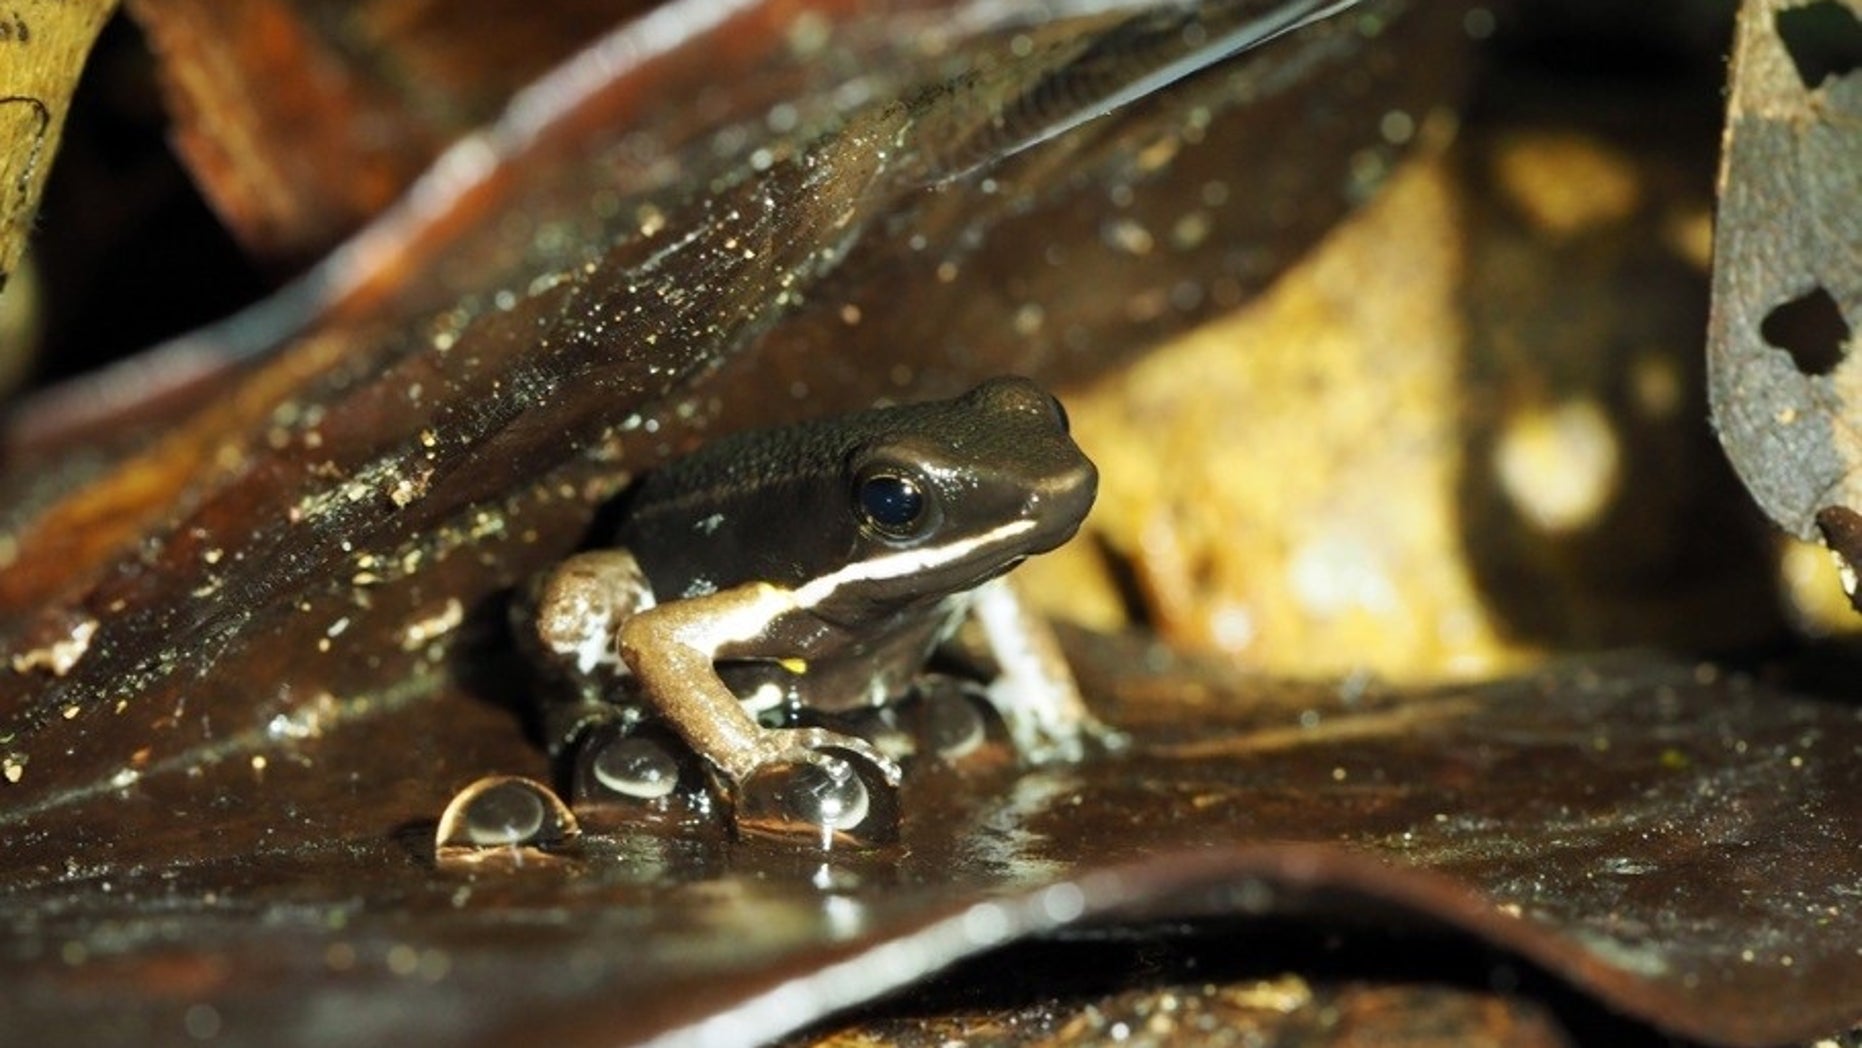 In new territory, good froggy dads go cannibal | Fox News